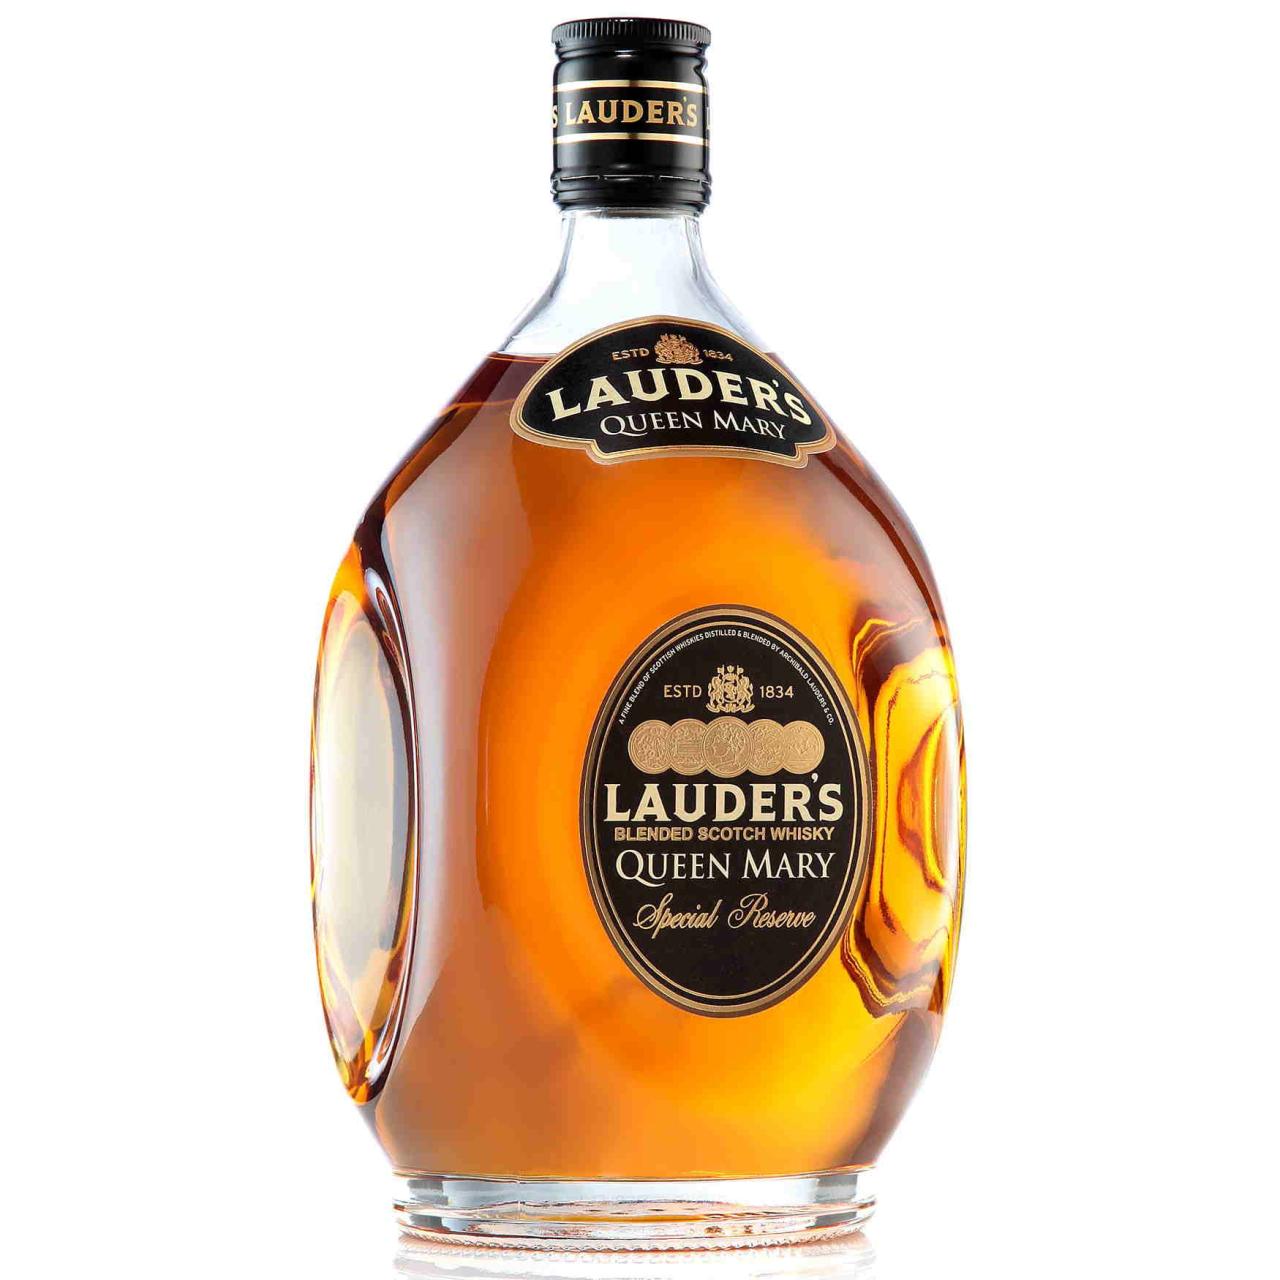 Lauder's Queen mary 40% 1,0l